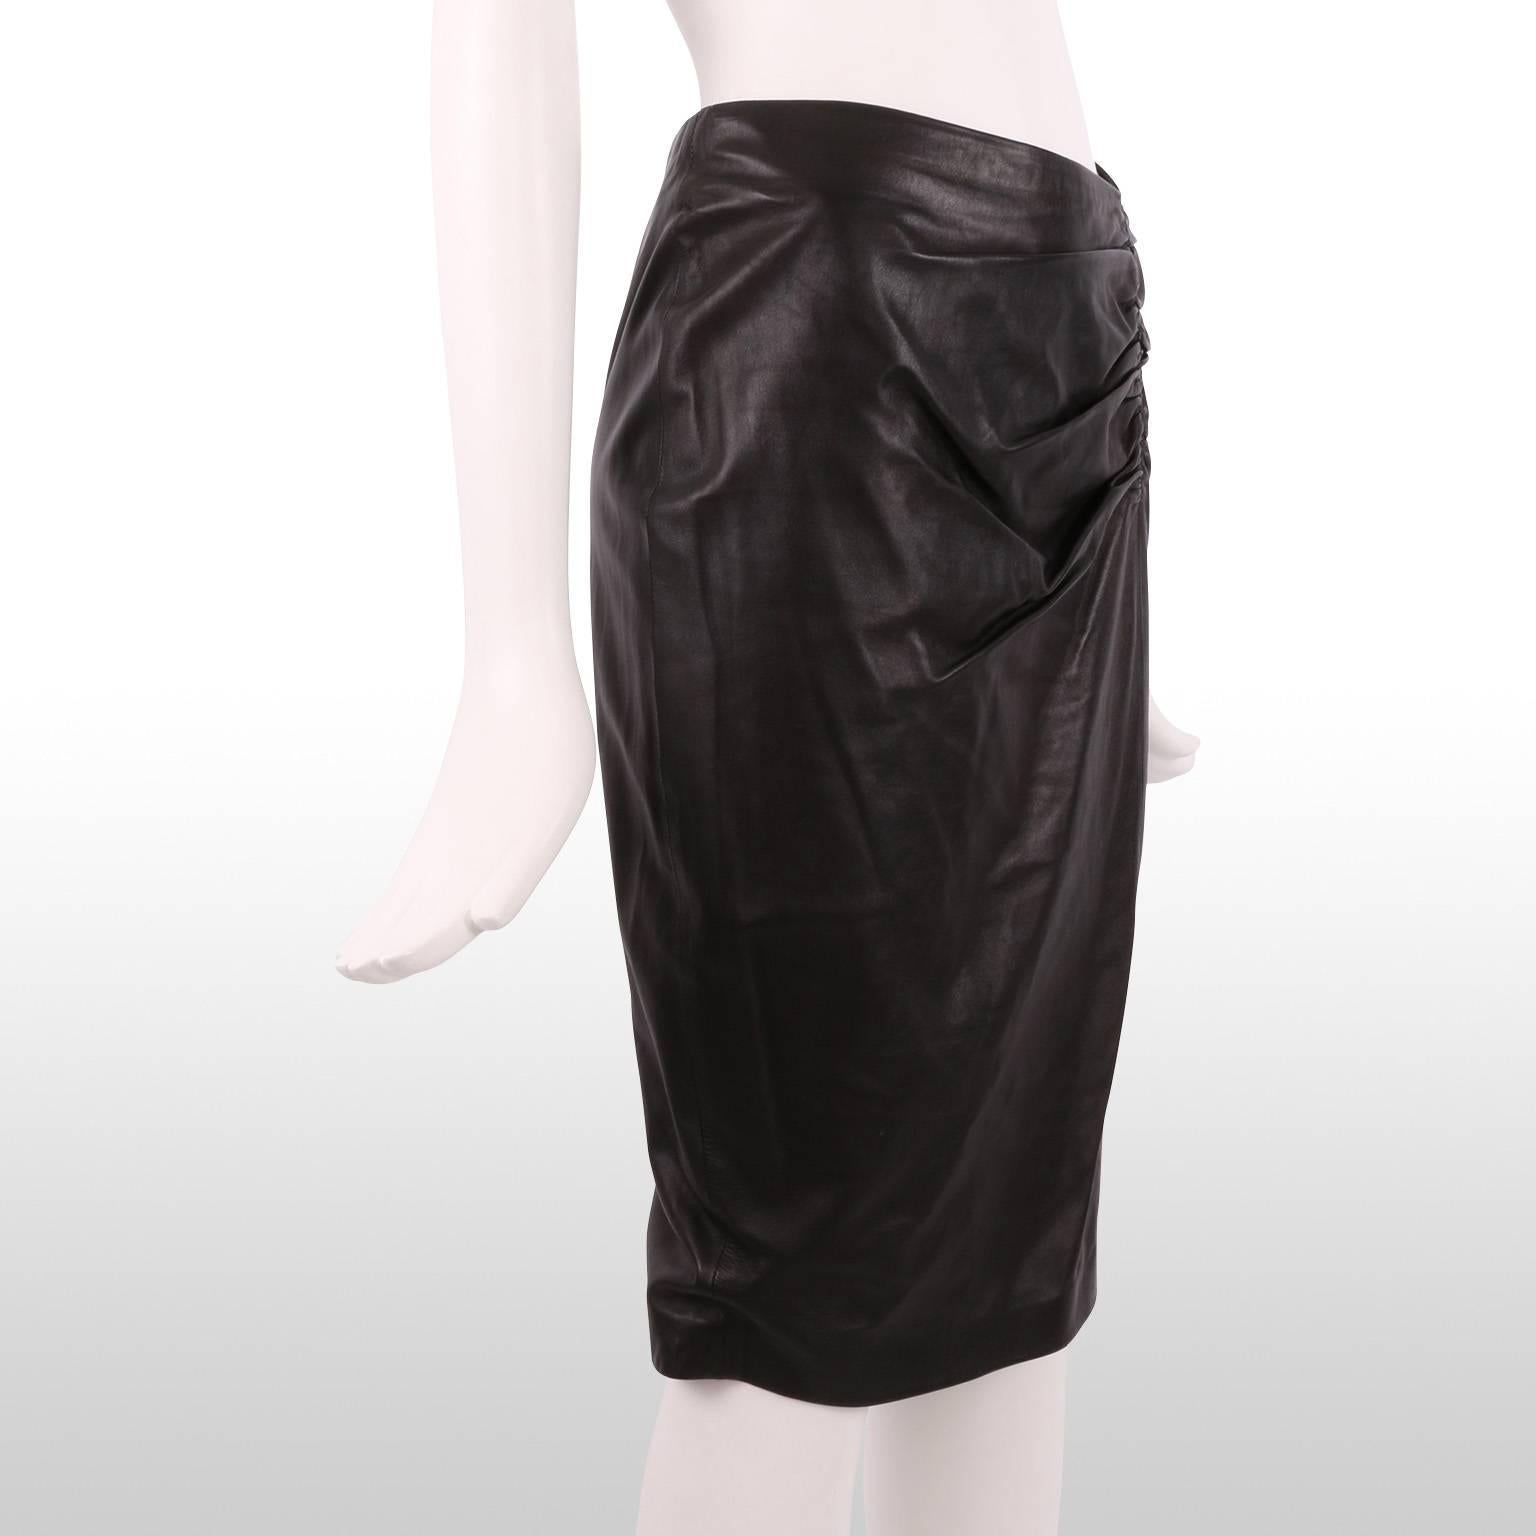 Gucci Ruched Side Leather Skirt  In Excellent Condition For Sale In London, GB